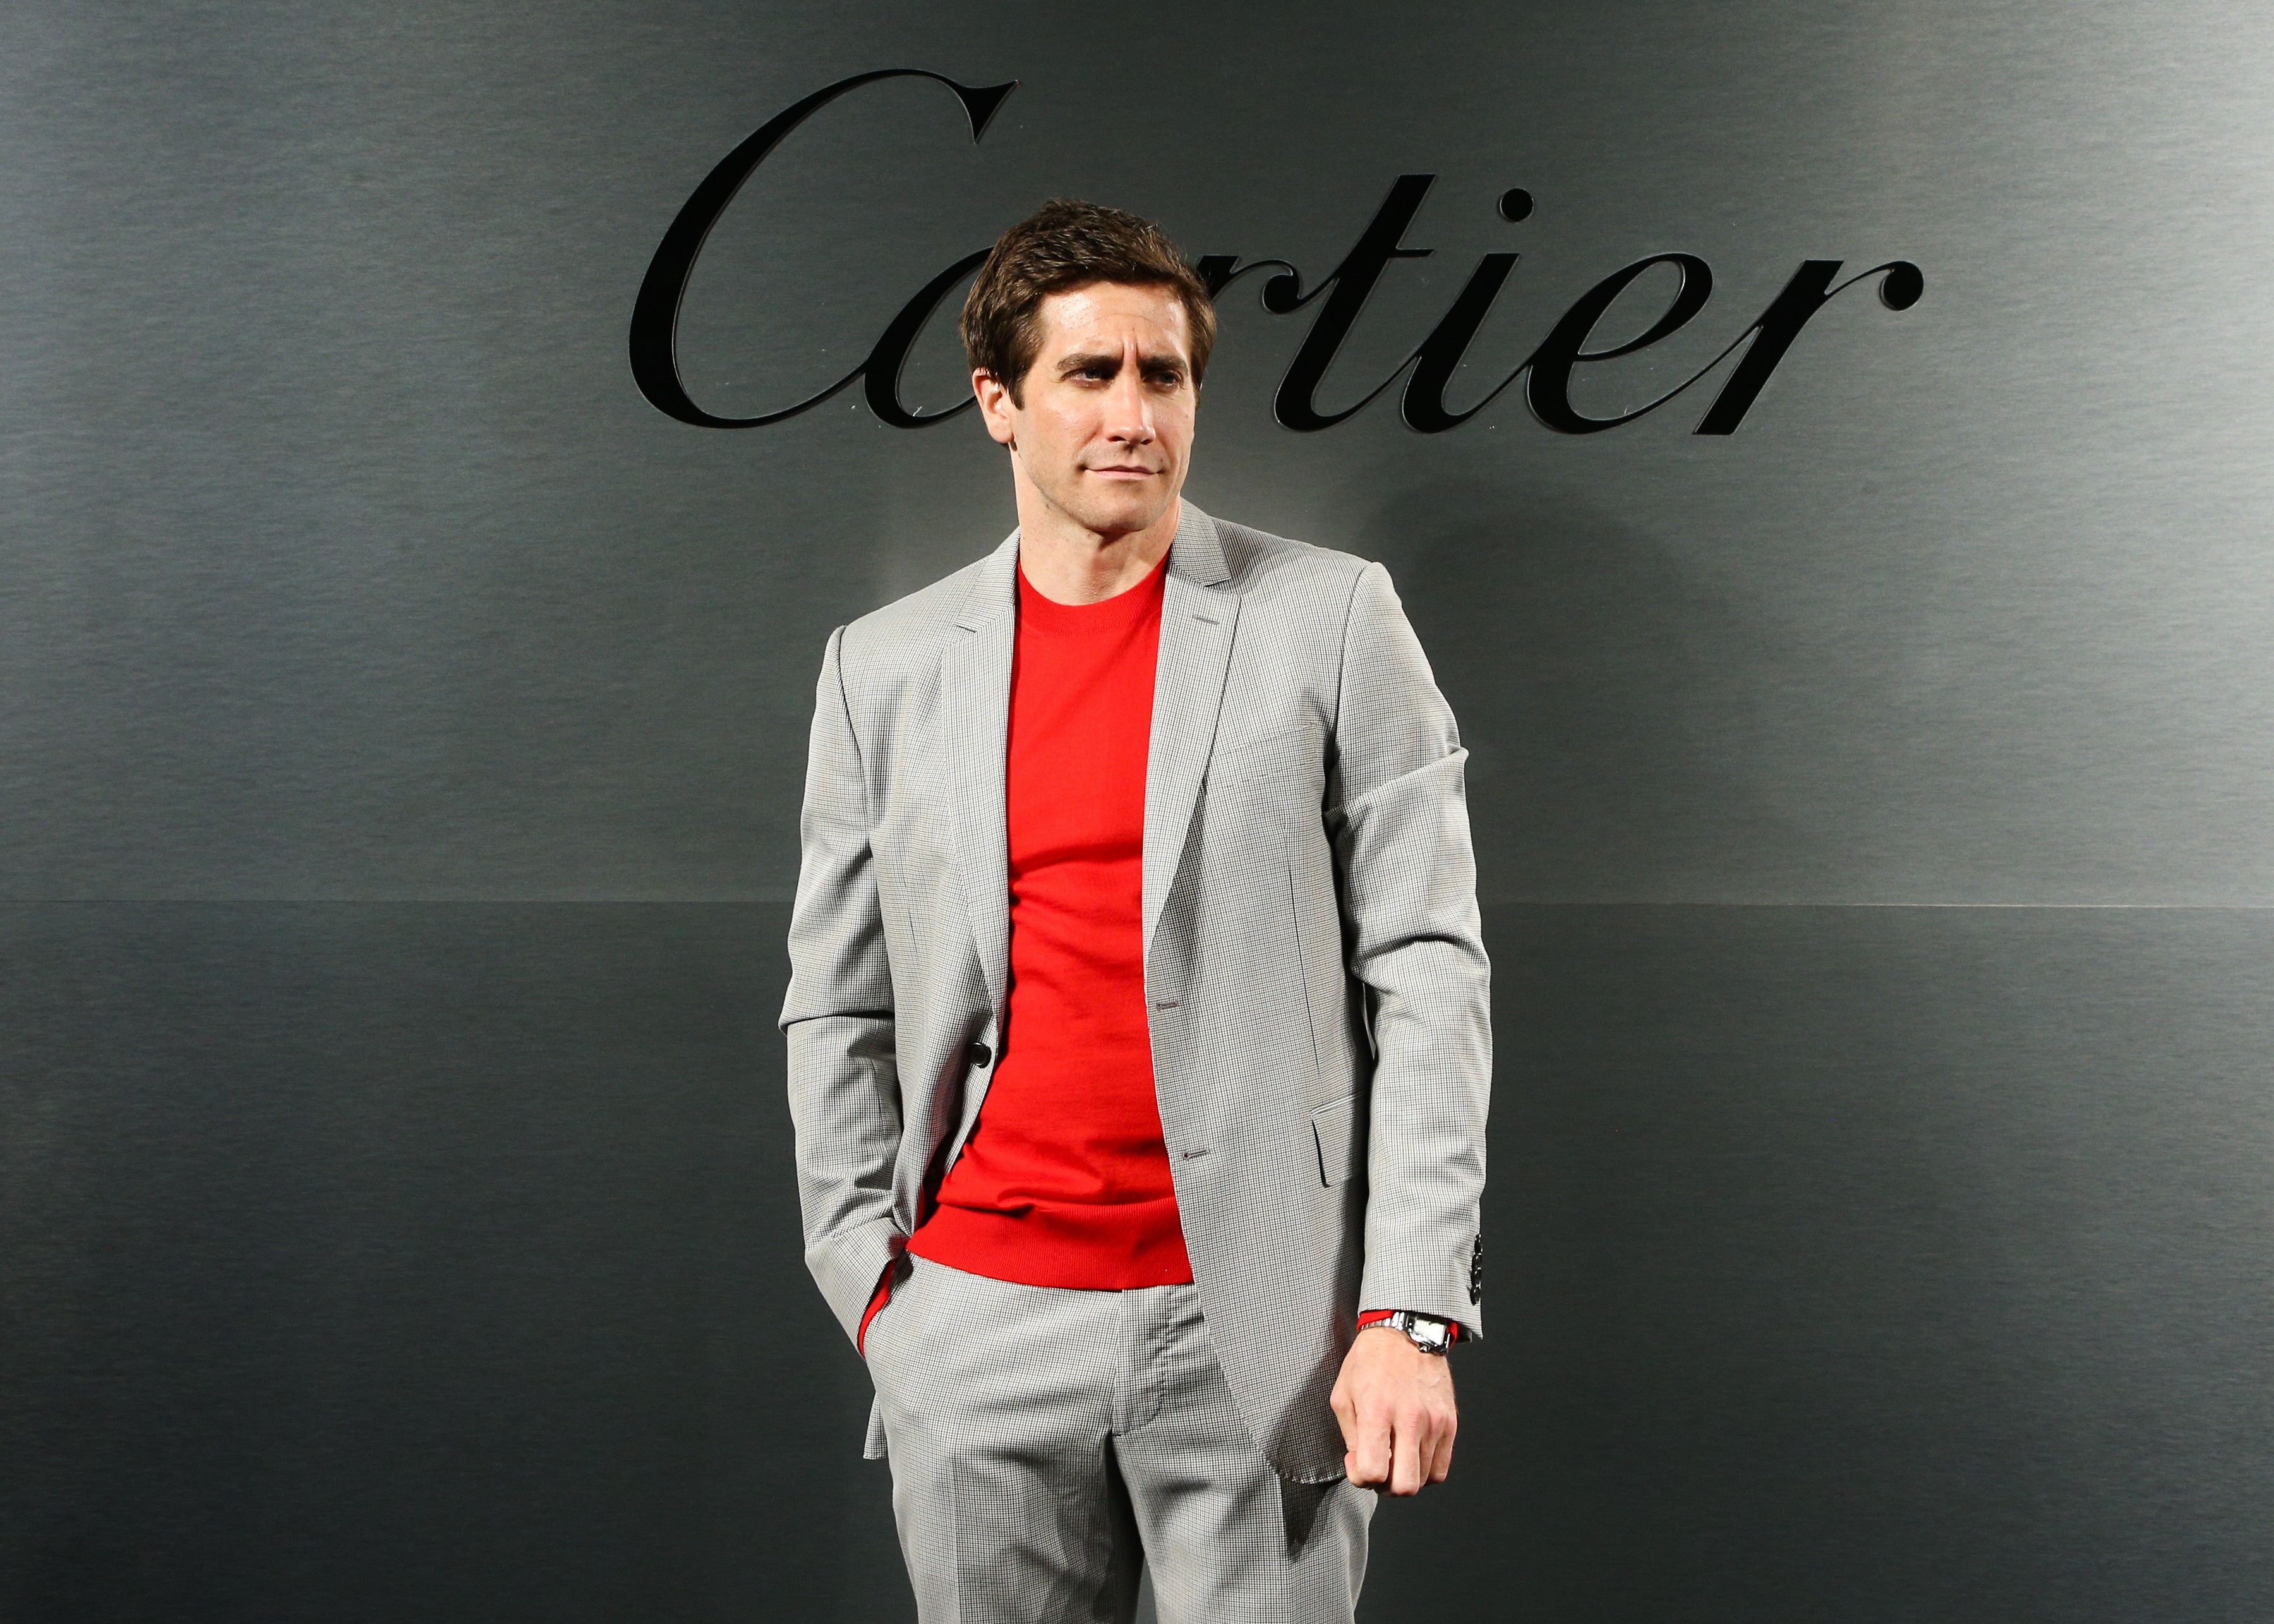 Cartier throws star-studded party to 